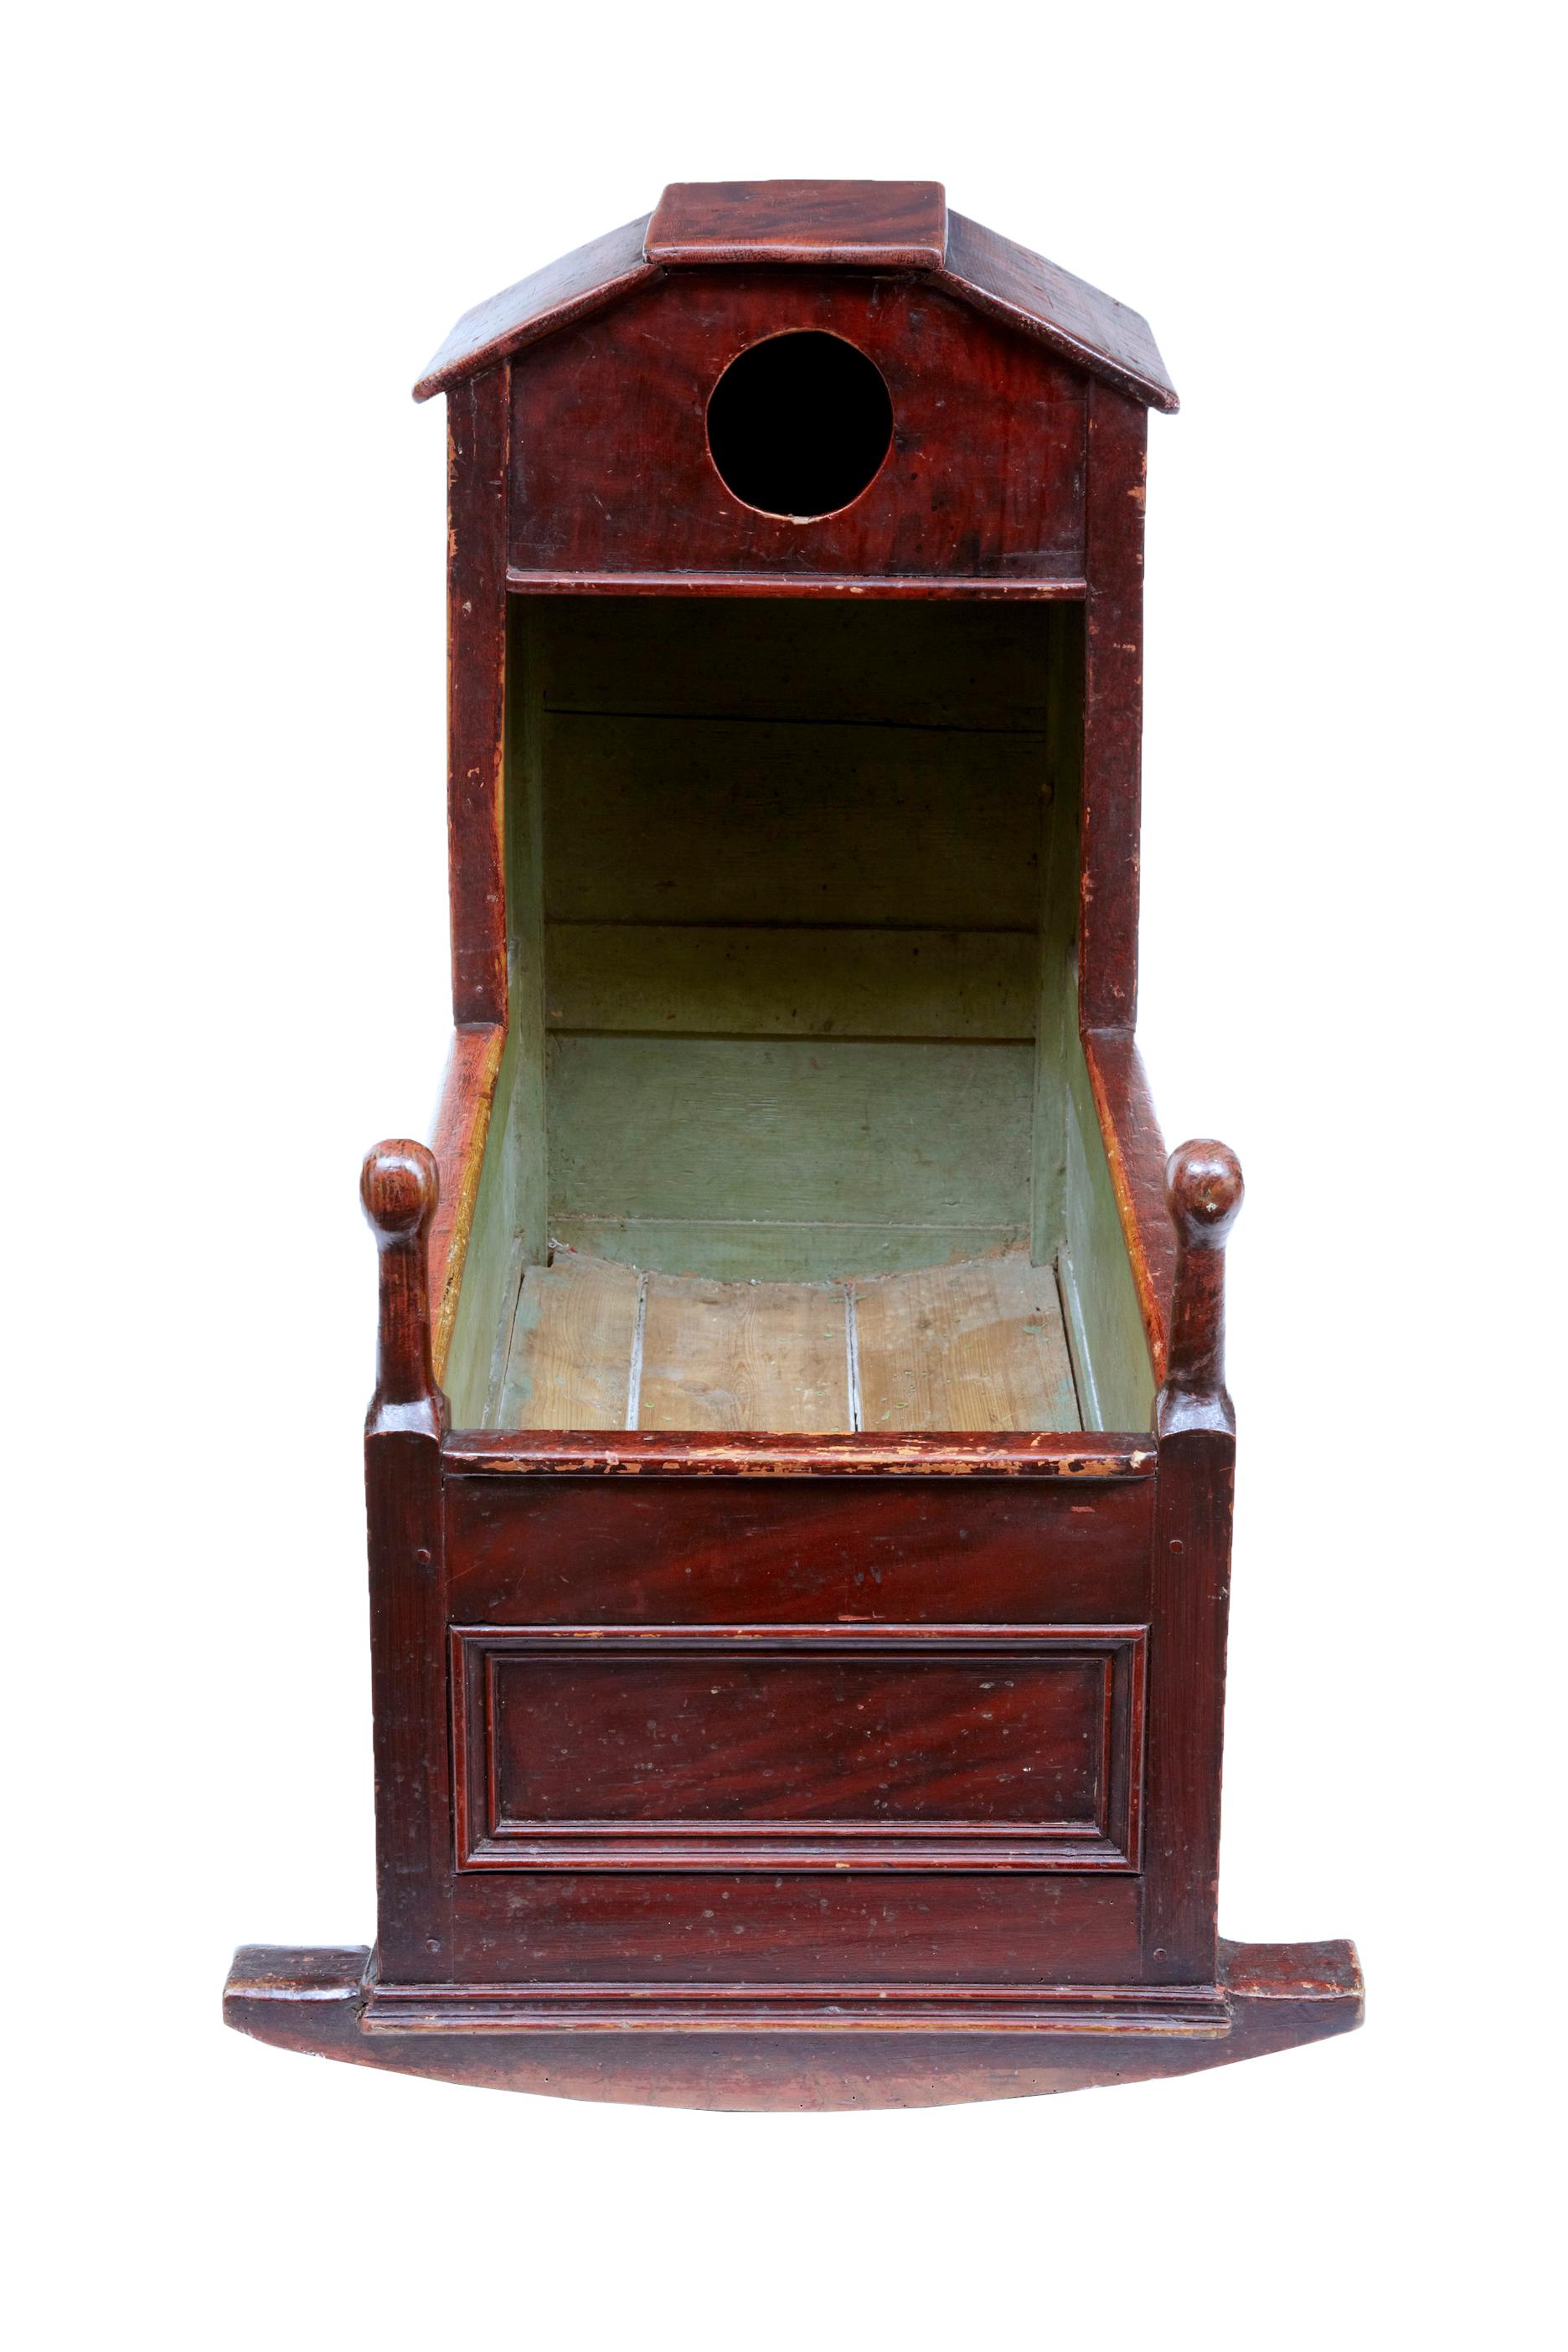 19th century painted pine child's cradle, circa 1870.

Hand painted decorative piece, ideal for use today as a display item. Canopy roof with pigeon hole, turned finials on the end.

Expected losses to paint, surface marks to wood work.
 